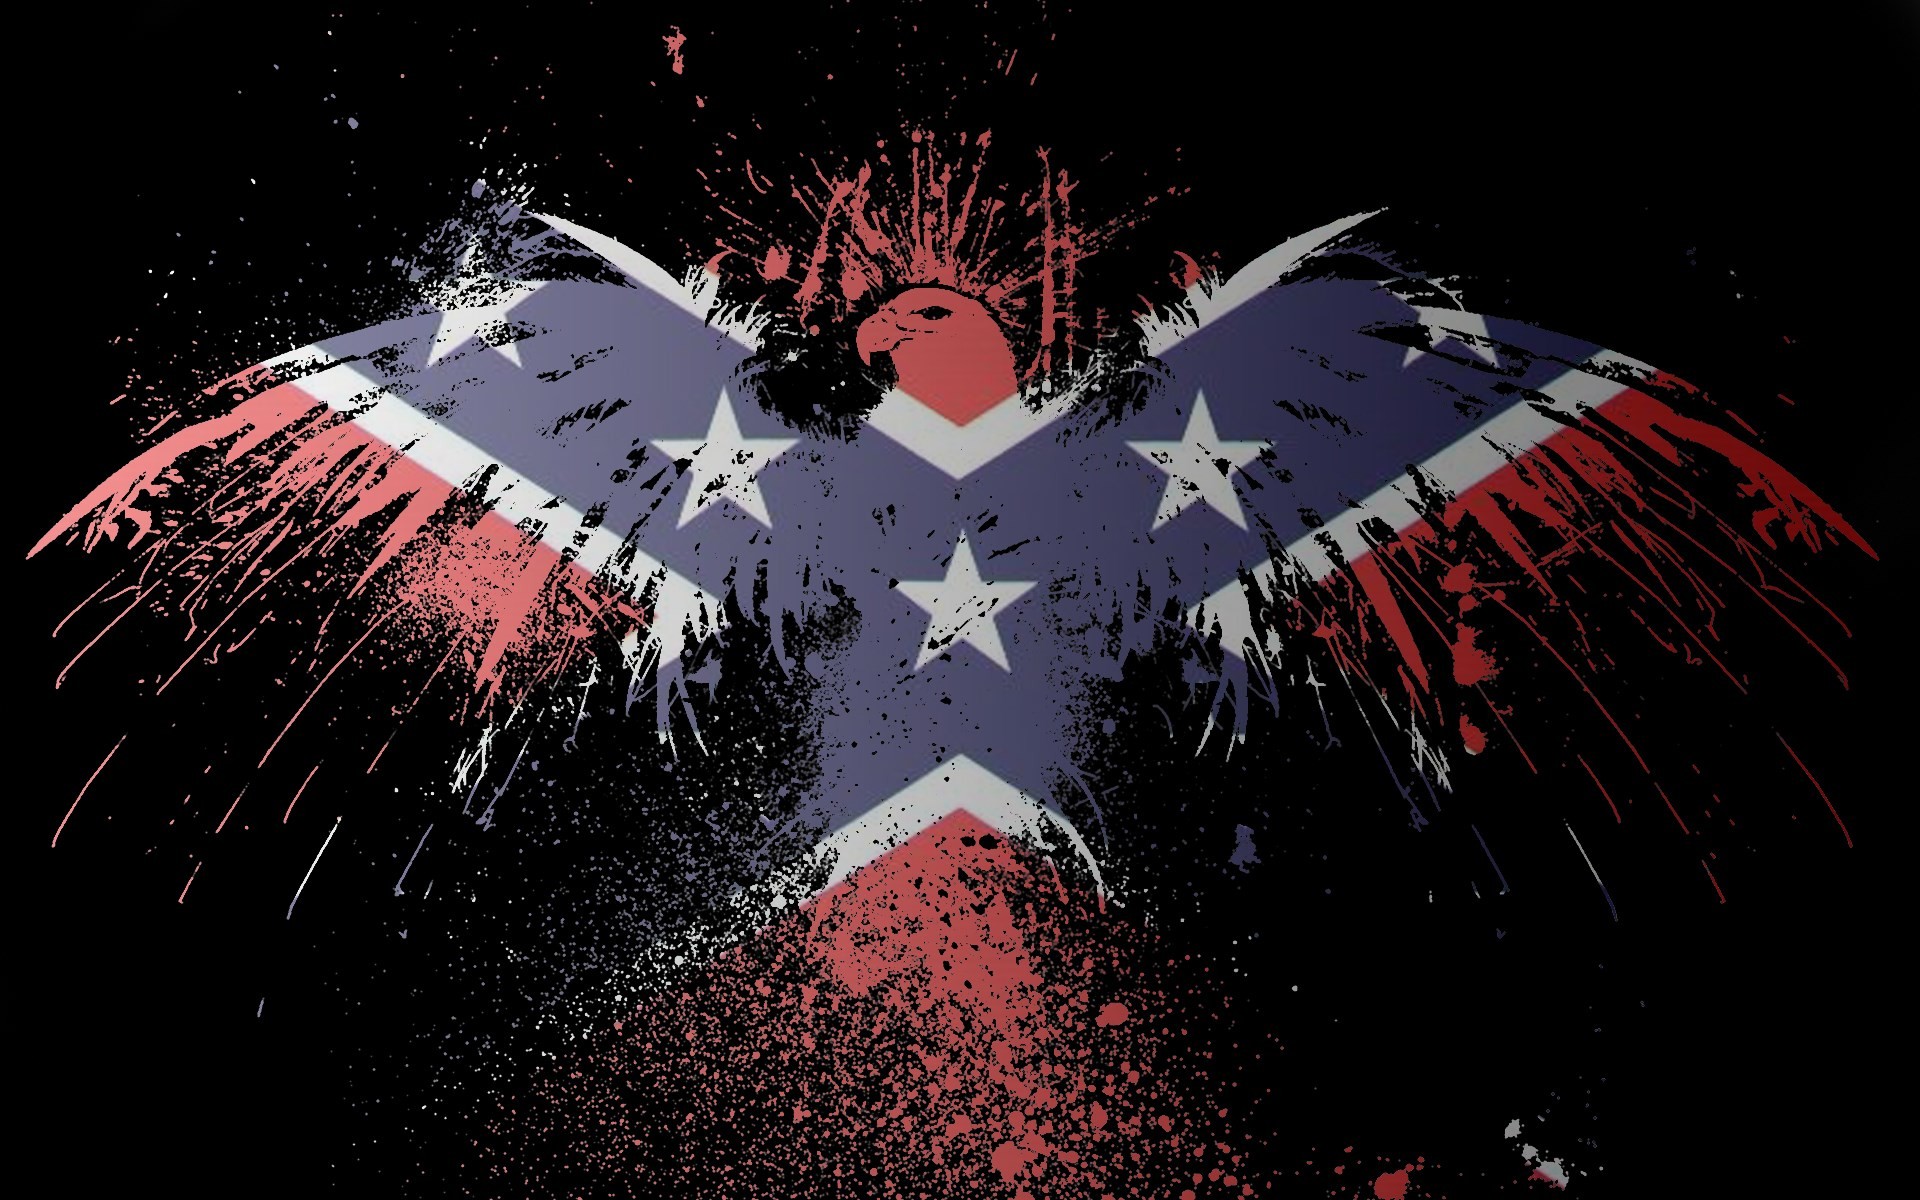 Confederate flag free background wallpaper 1920×1080 197 kb by